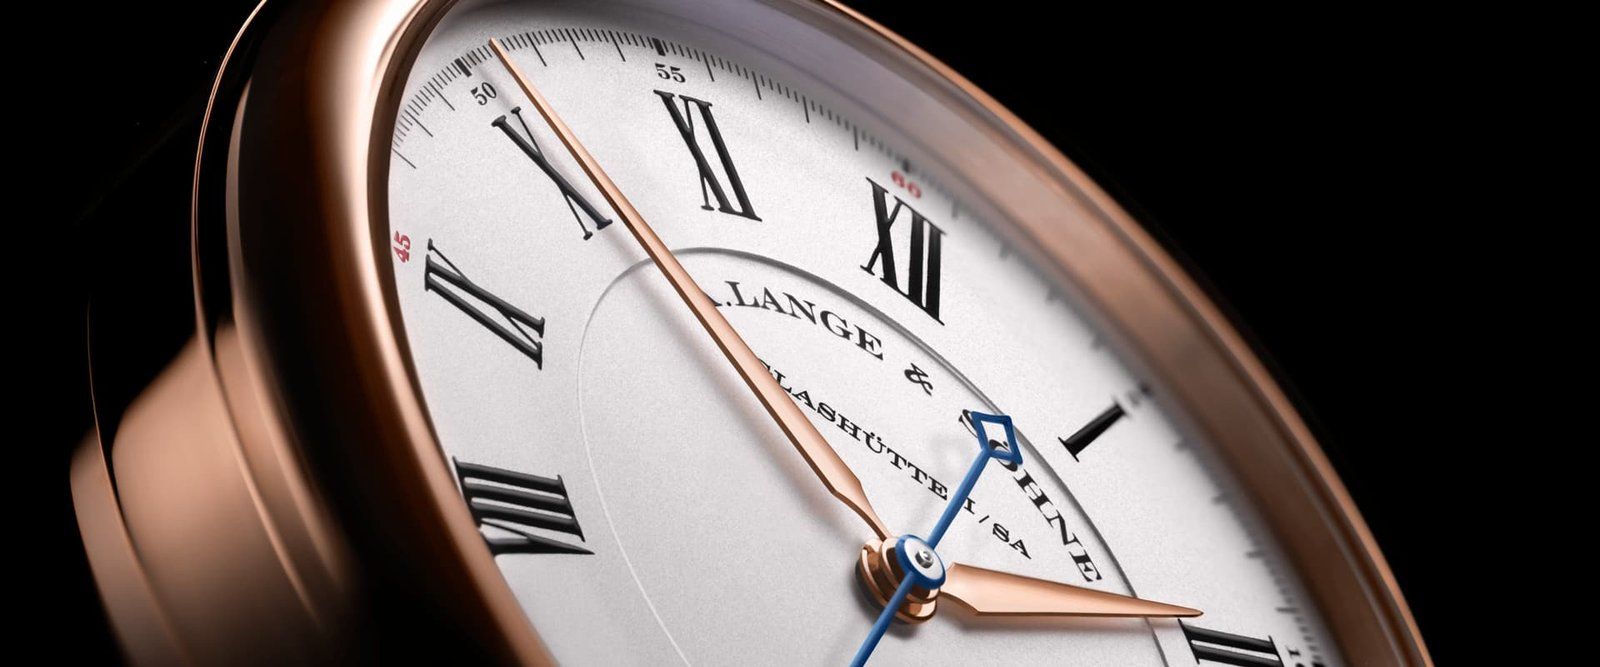 Richard Lange continues the tradition of scientific observation watches at A. Lange & Söhne